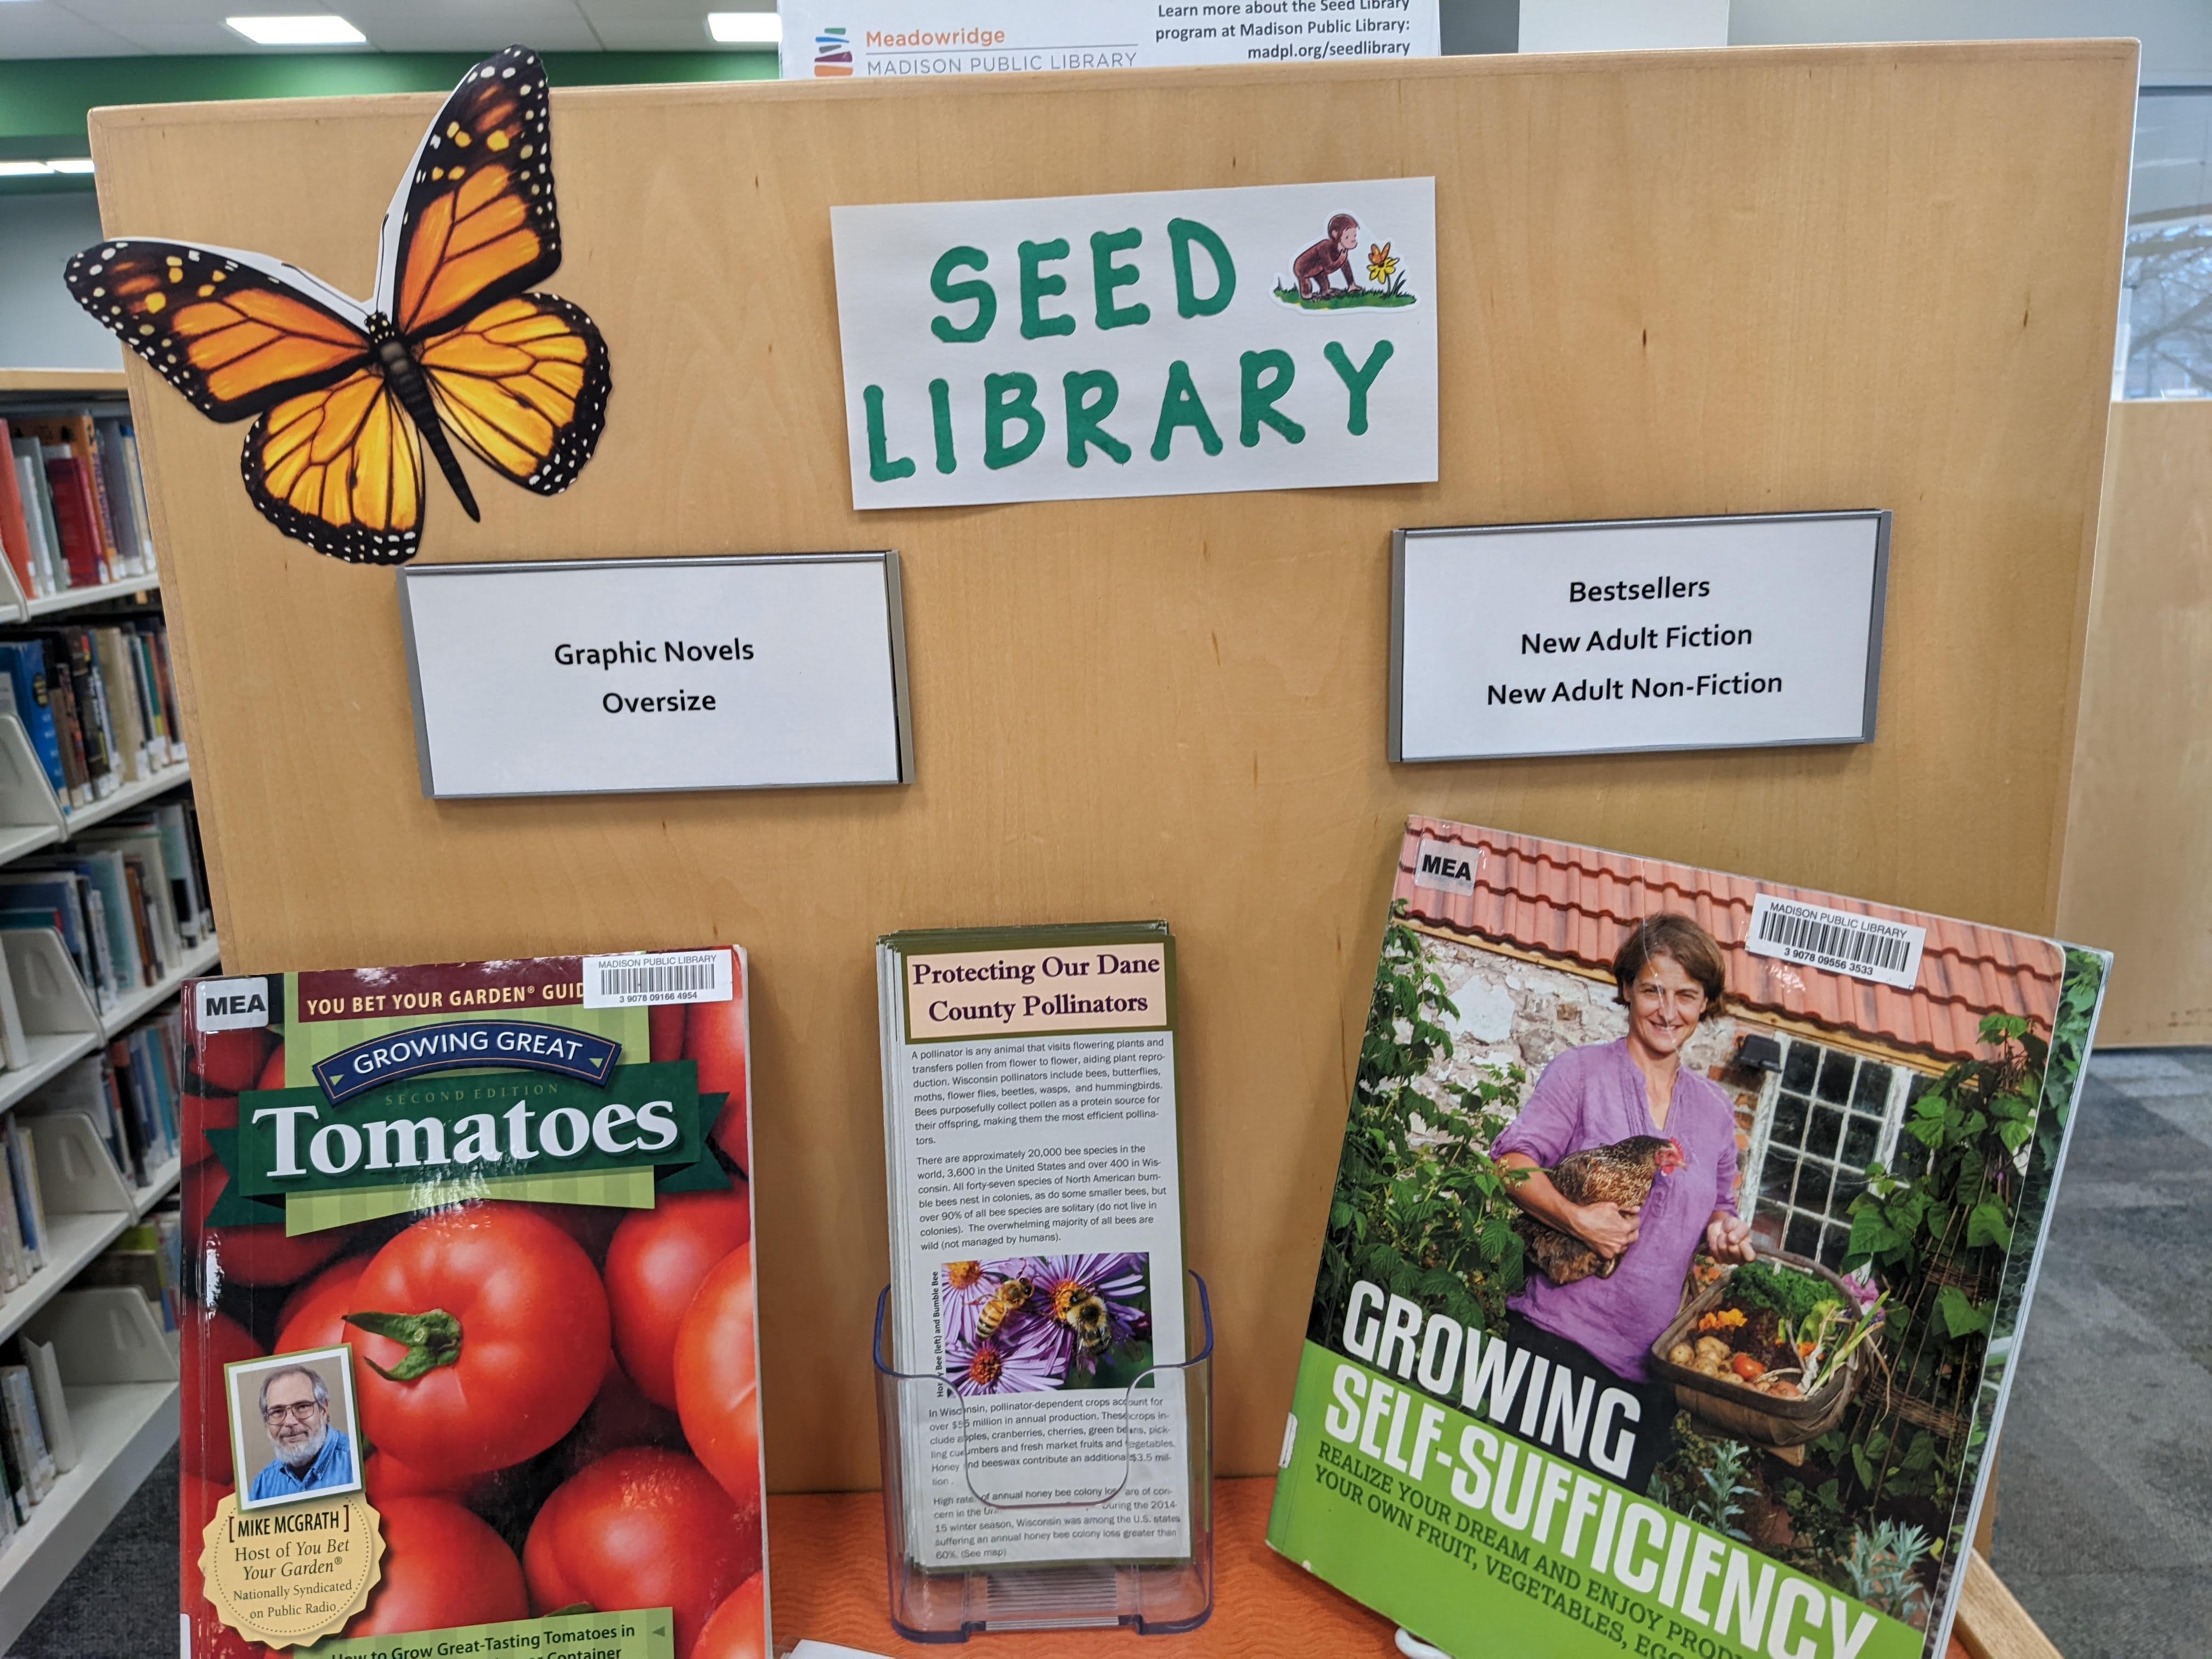 Seed Libary Book Display at Meadowridge Library for Madison Public Library